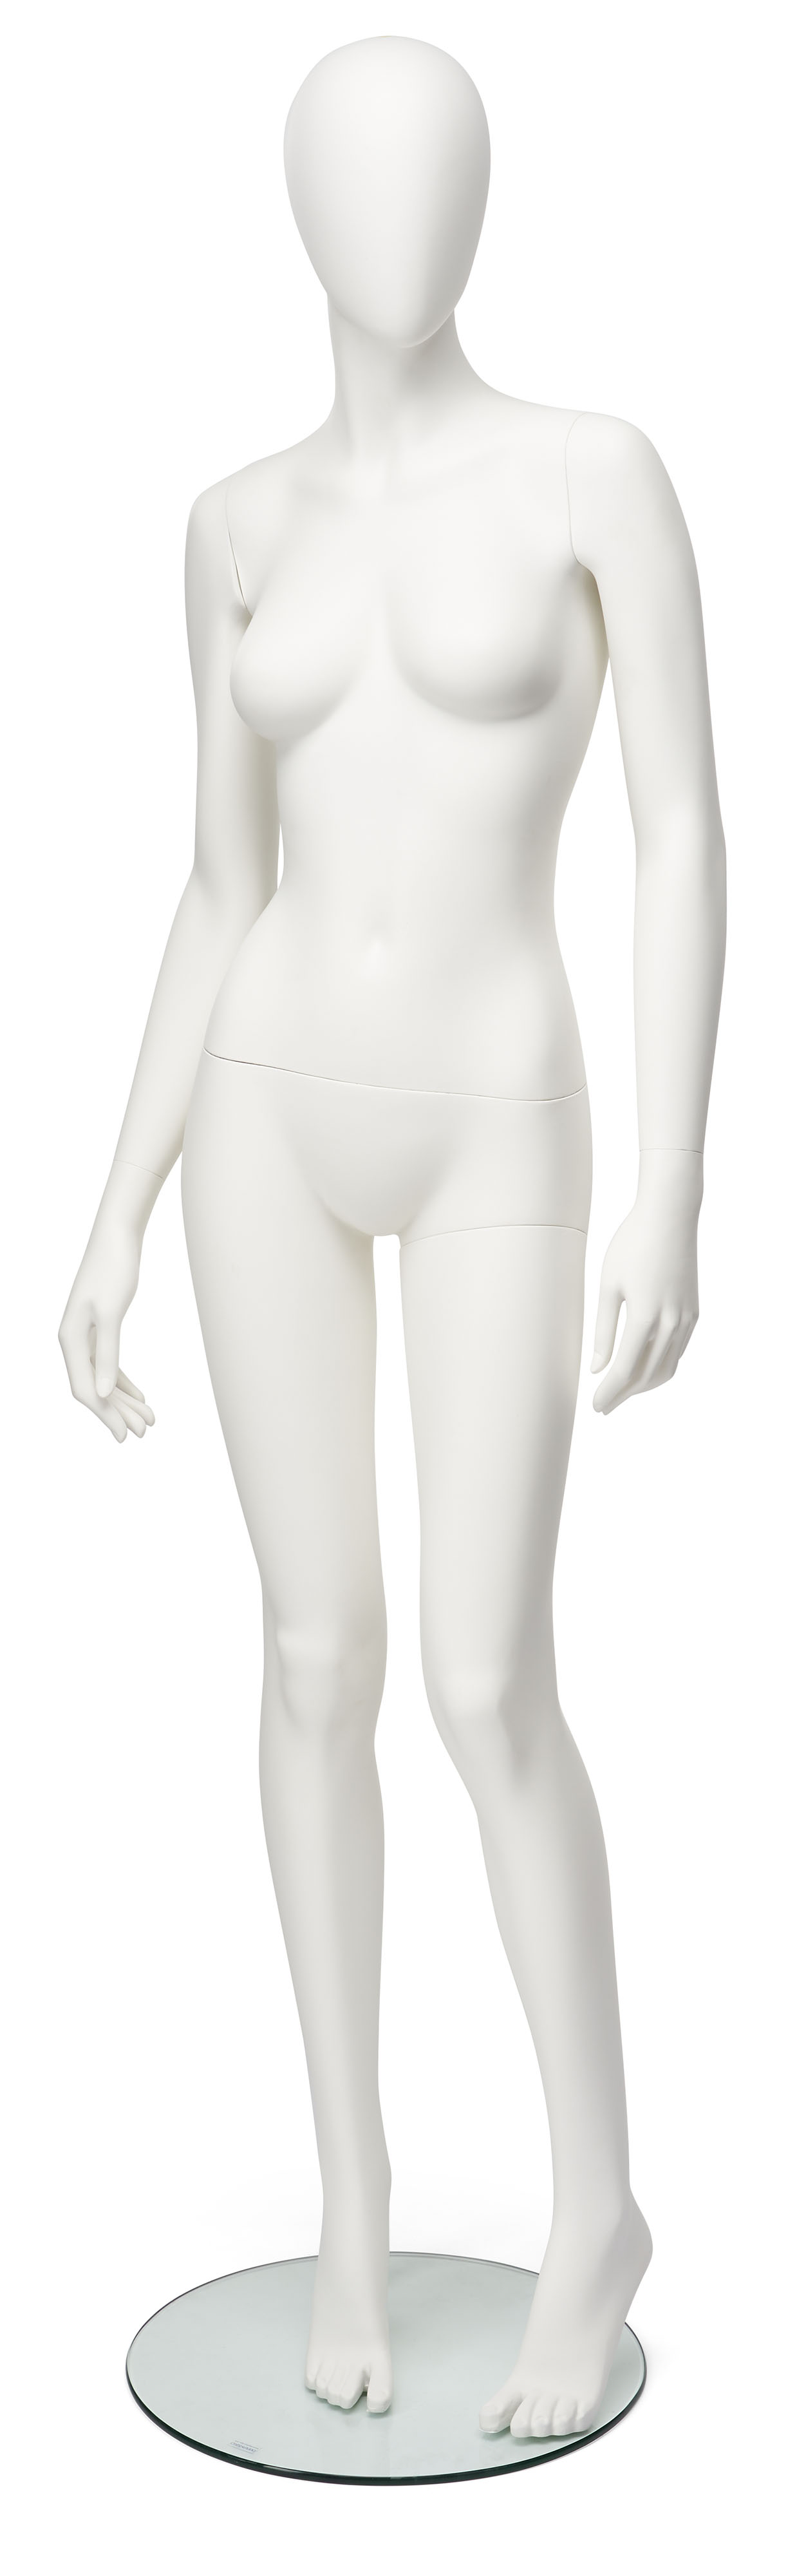 Abstract Female Mannequin  Durable ABS Plastic Construction